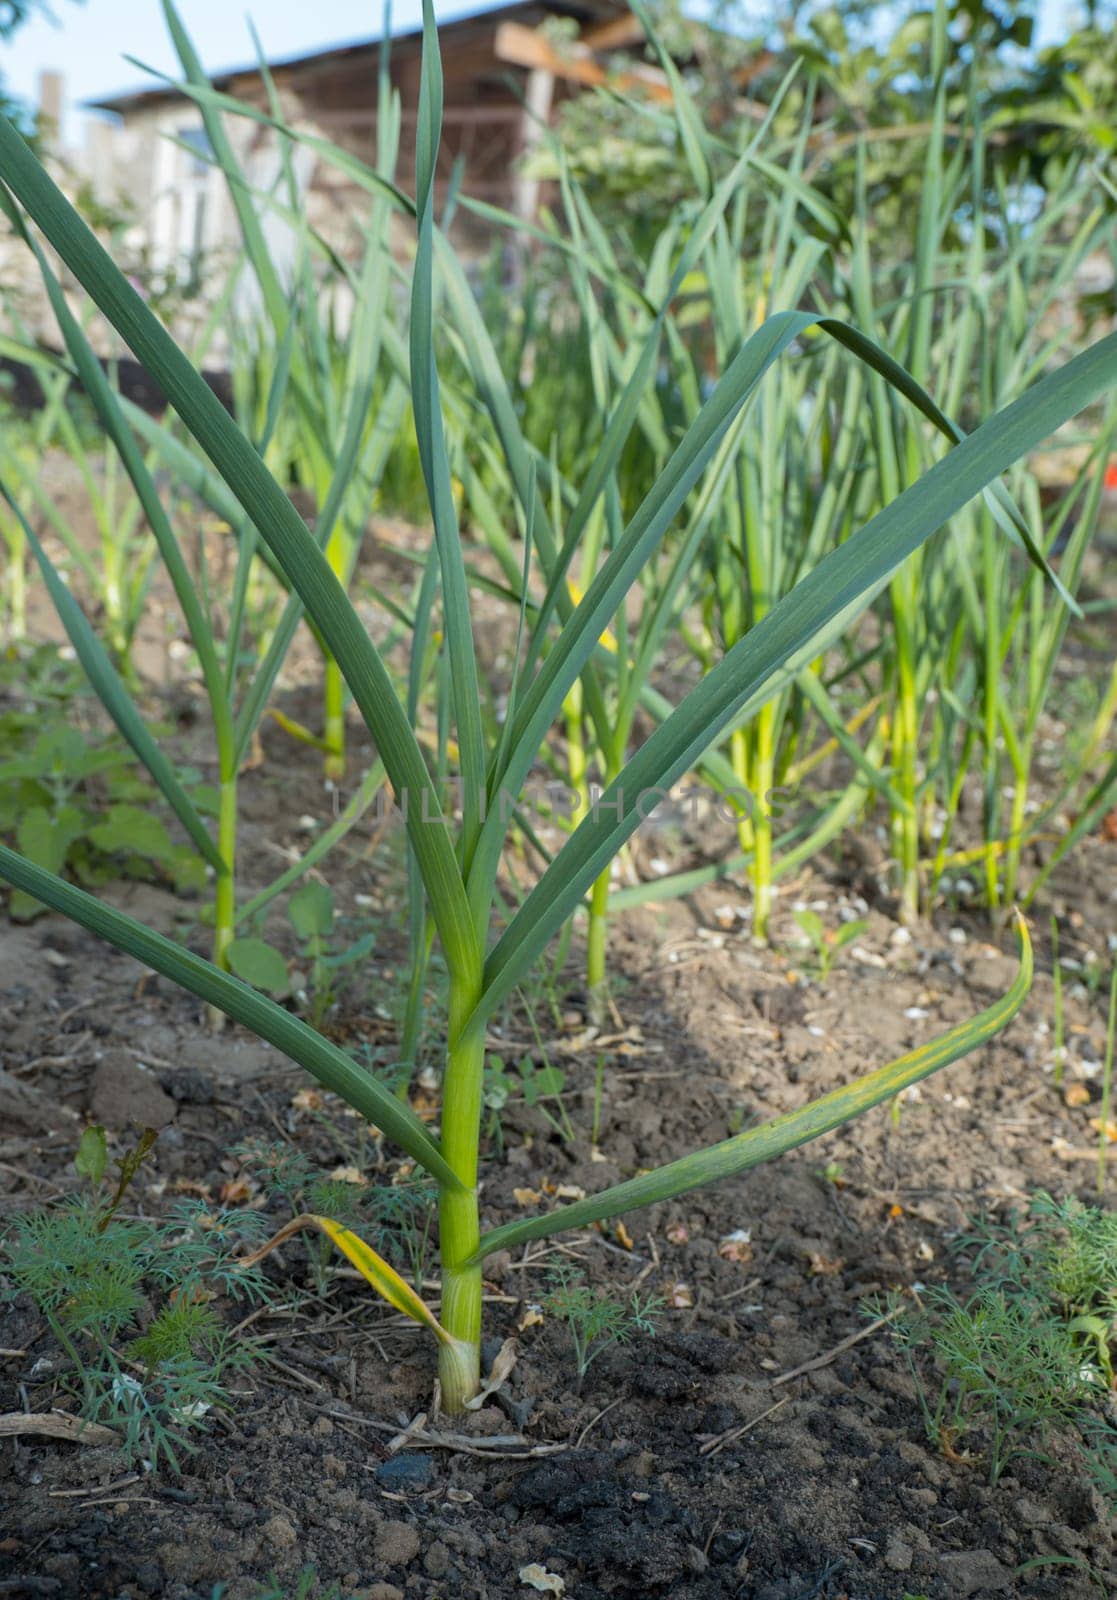 Young garlic growing in the ground. Close-up of young strong plants. Vegetable garden concept